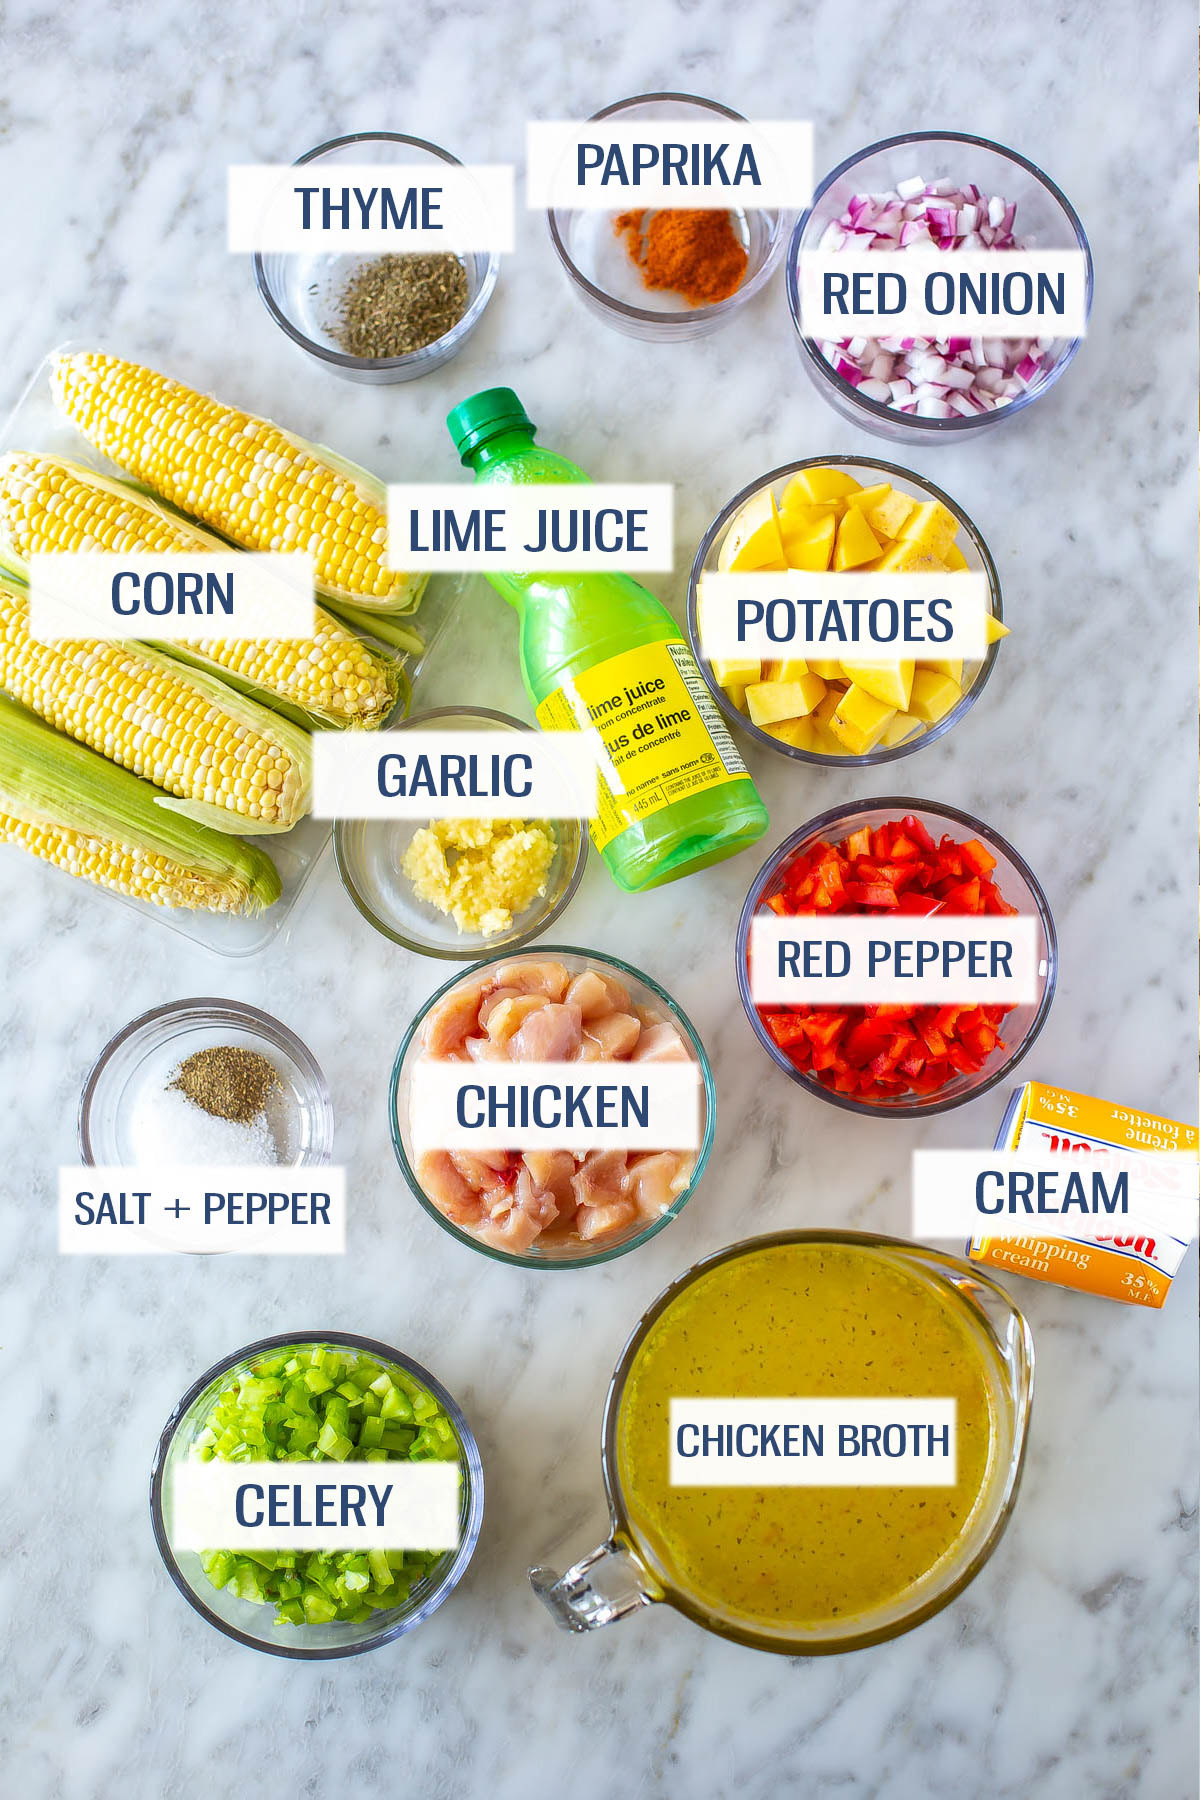 Ingredients for chicken corn chowder: thyme, paprika, red onion, corn, lime juice, potatoes, garlic, red pepper, chicken breast, cream, celery, chicken broth, salt and pepper.